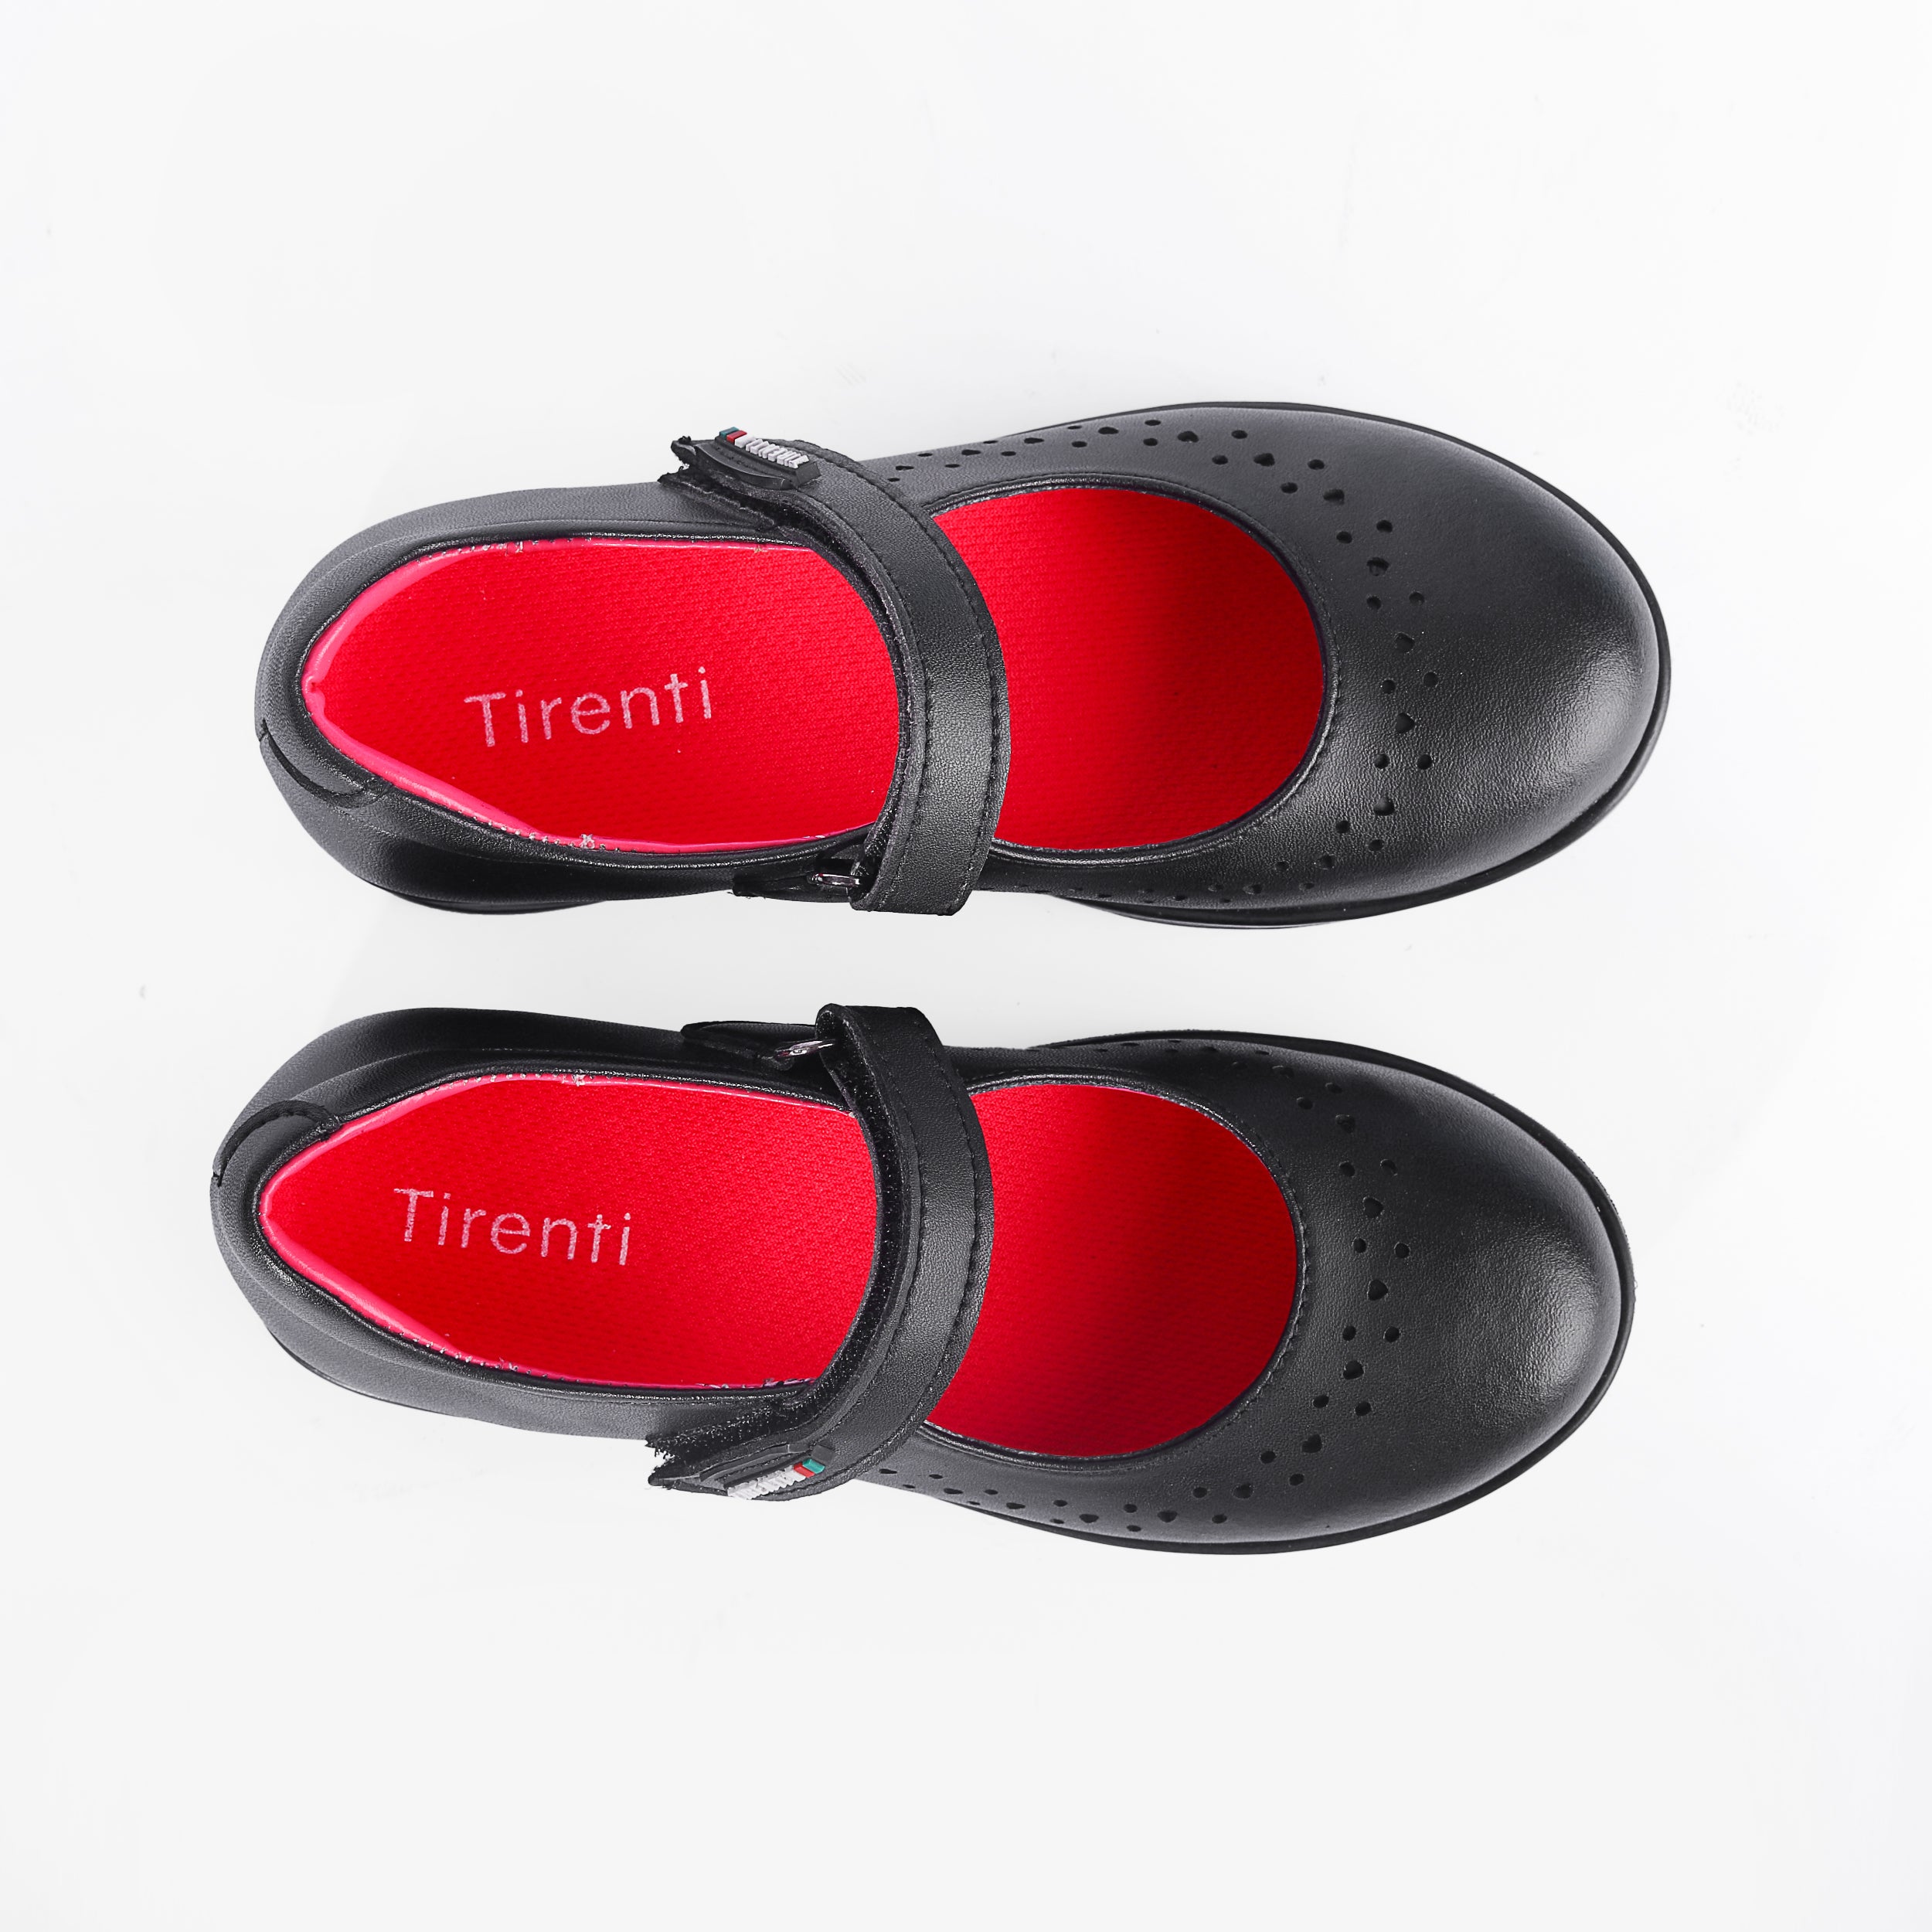 Black Shoes with Pull Tab for Kids L-4